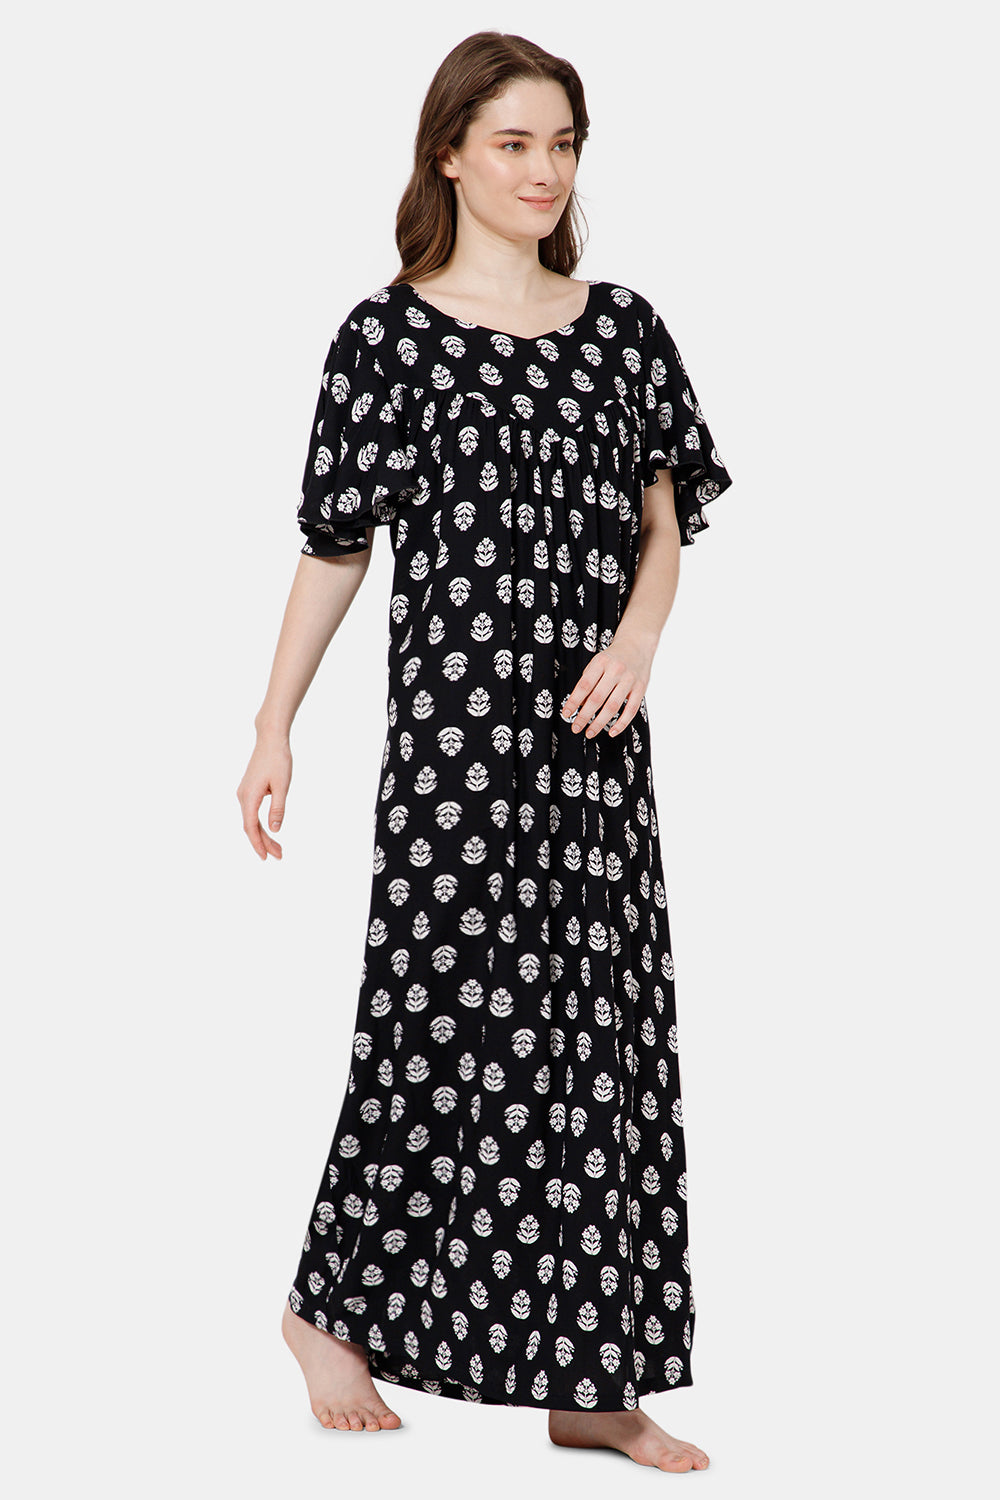 Naidu Hall All Over Printed Cotton Nighty with Butterfly Sleeves Diamond Neck - Black print-1 - NT37